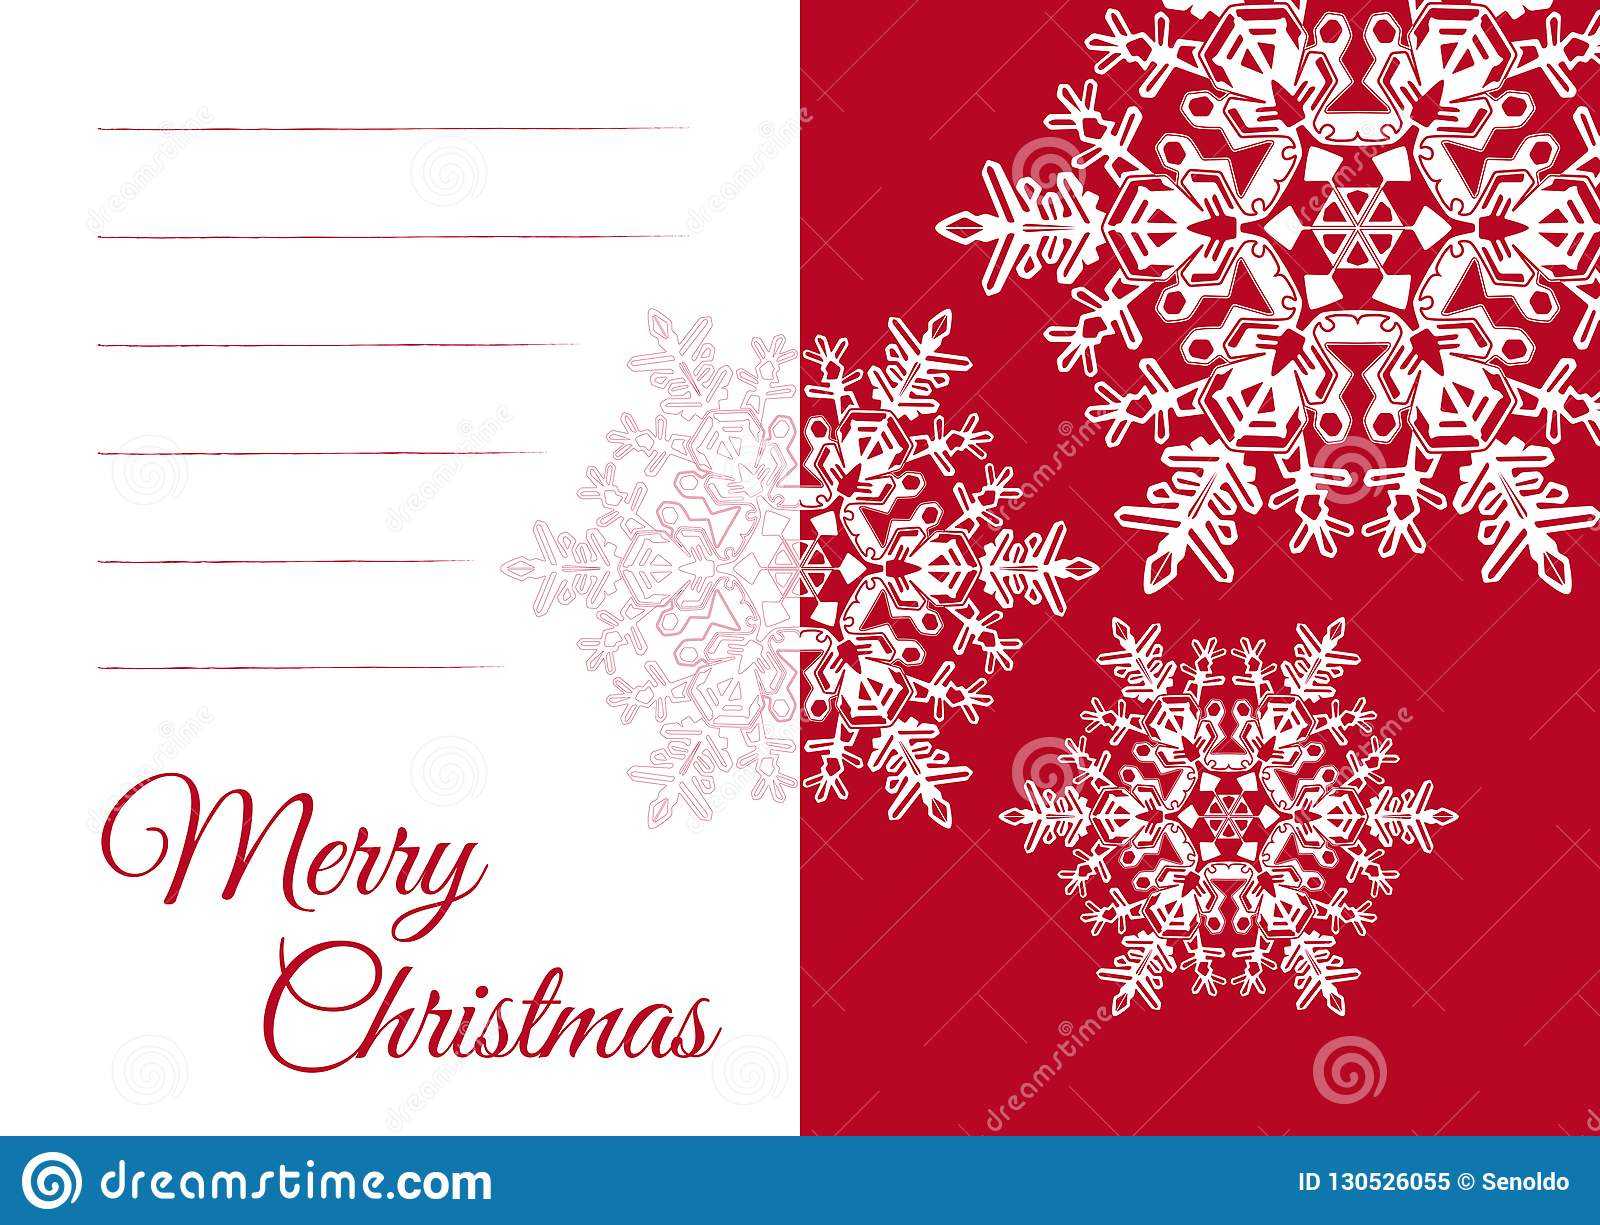 Christmas Greeting Card Template With Blank Text Field Stock For Blank Christmas Card Templates Free